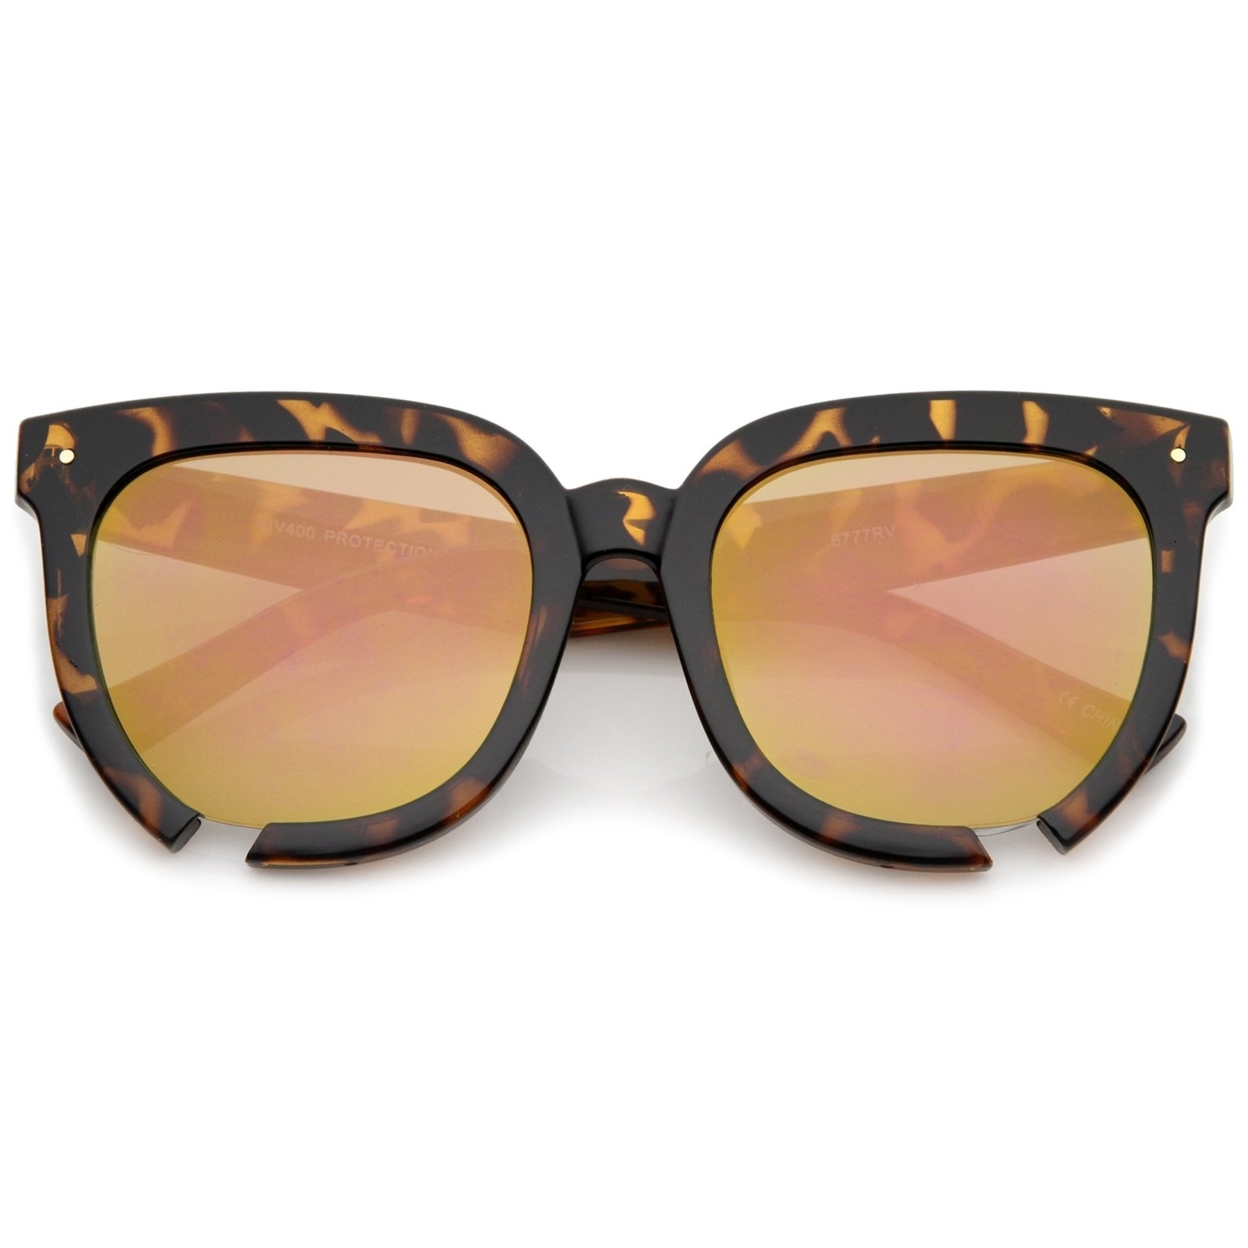 Oversize Notch Detail Square Colored Mirror Flat Lens Horn Rimmed Sunglasses 54mm - Tortoise / Gold Mirror